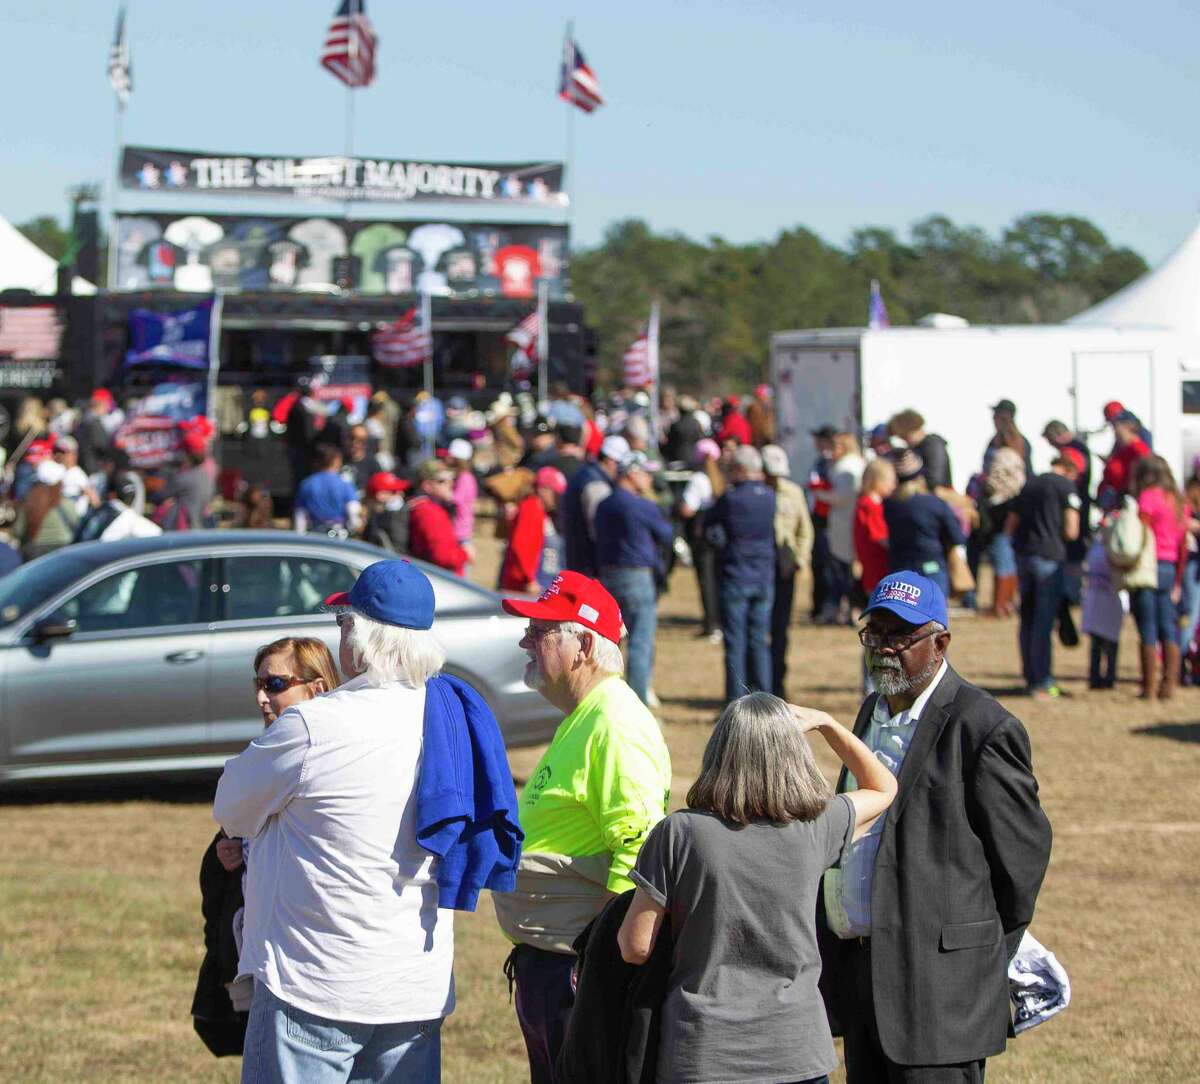 Rally goers wait in line to go through security for the Save America Rally where former President Donald Trump will speak, Saturday, Jan. 29, 2022, in Conroe.